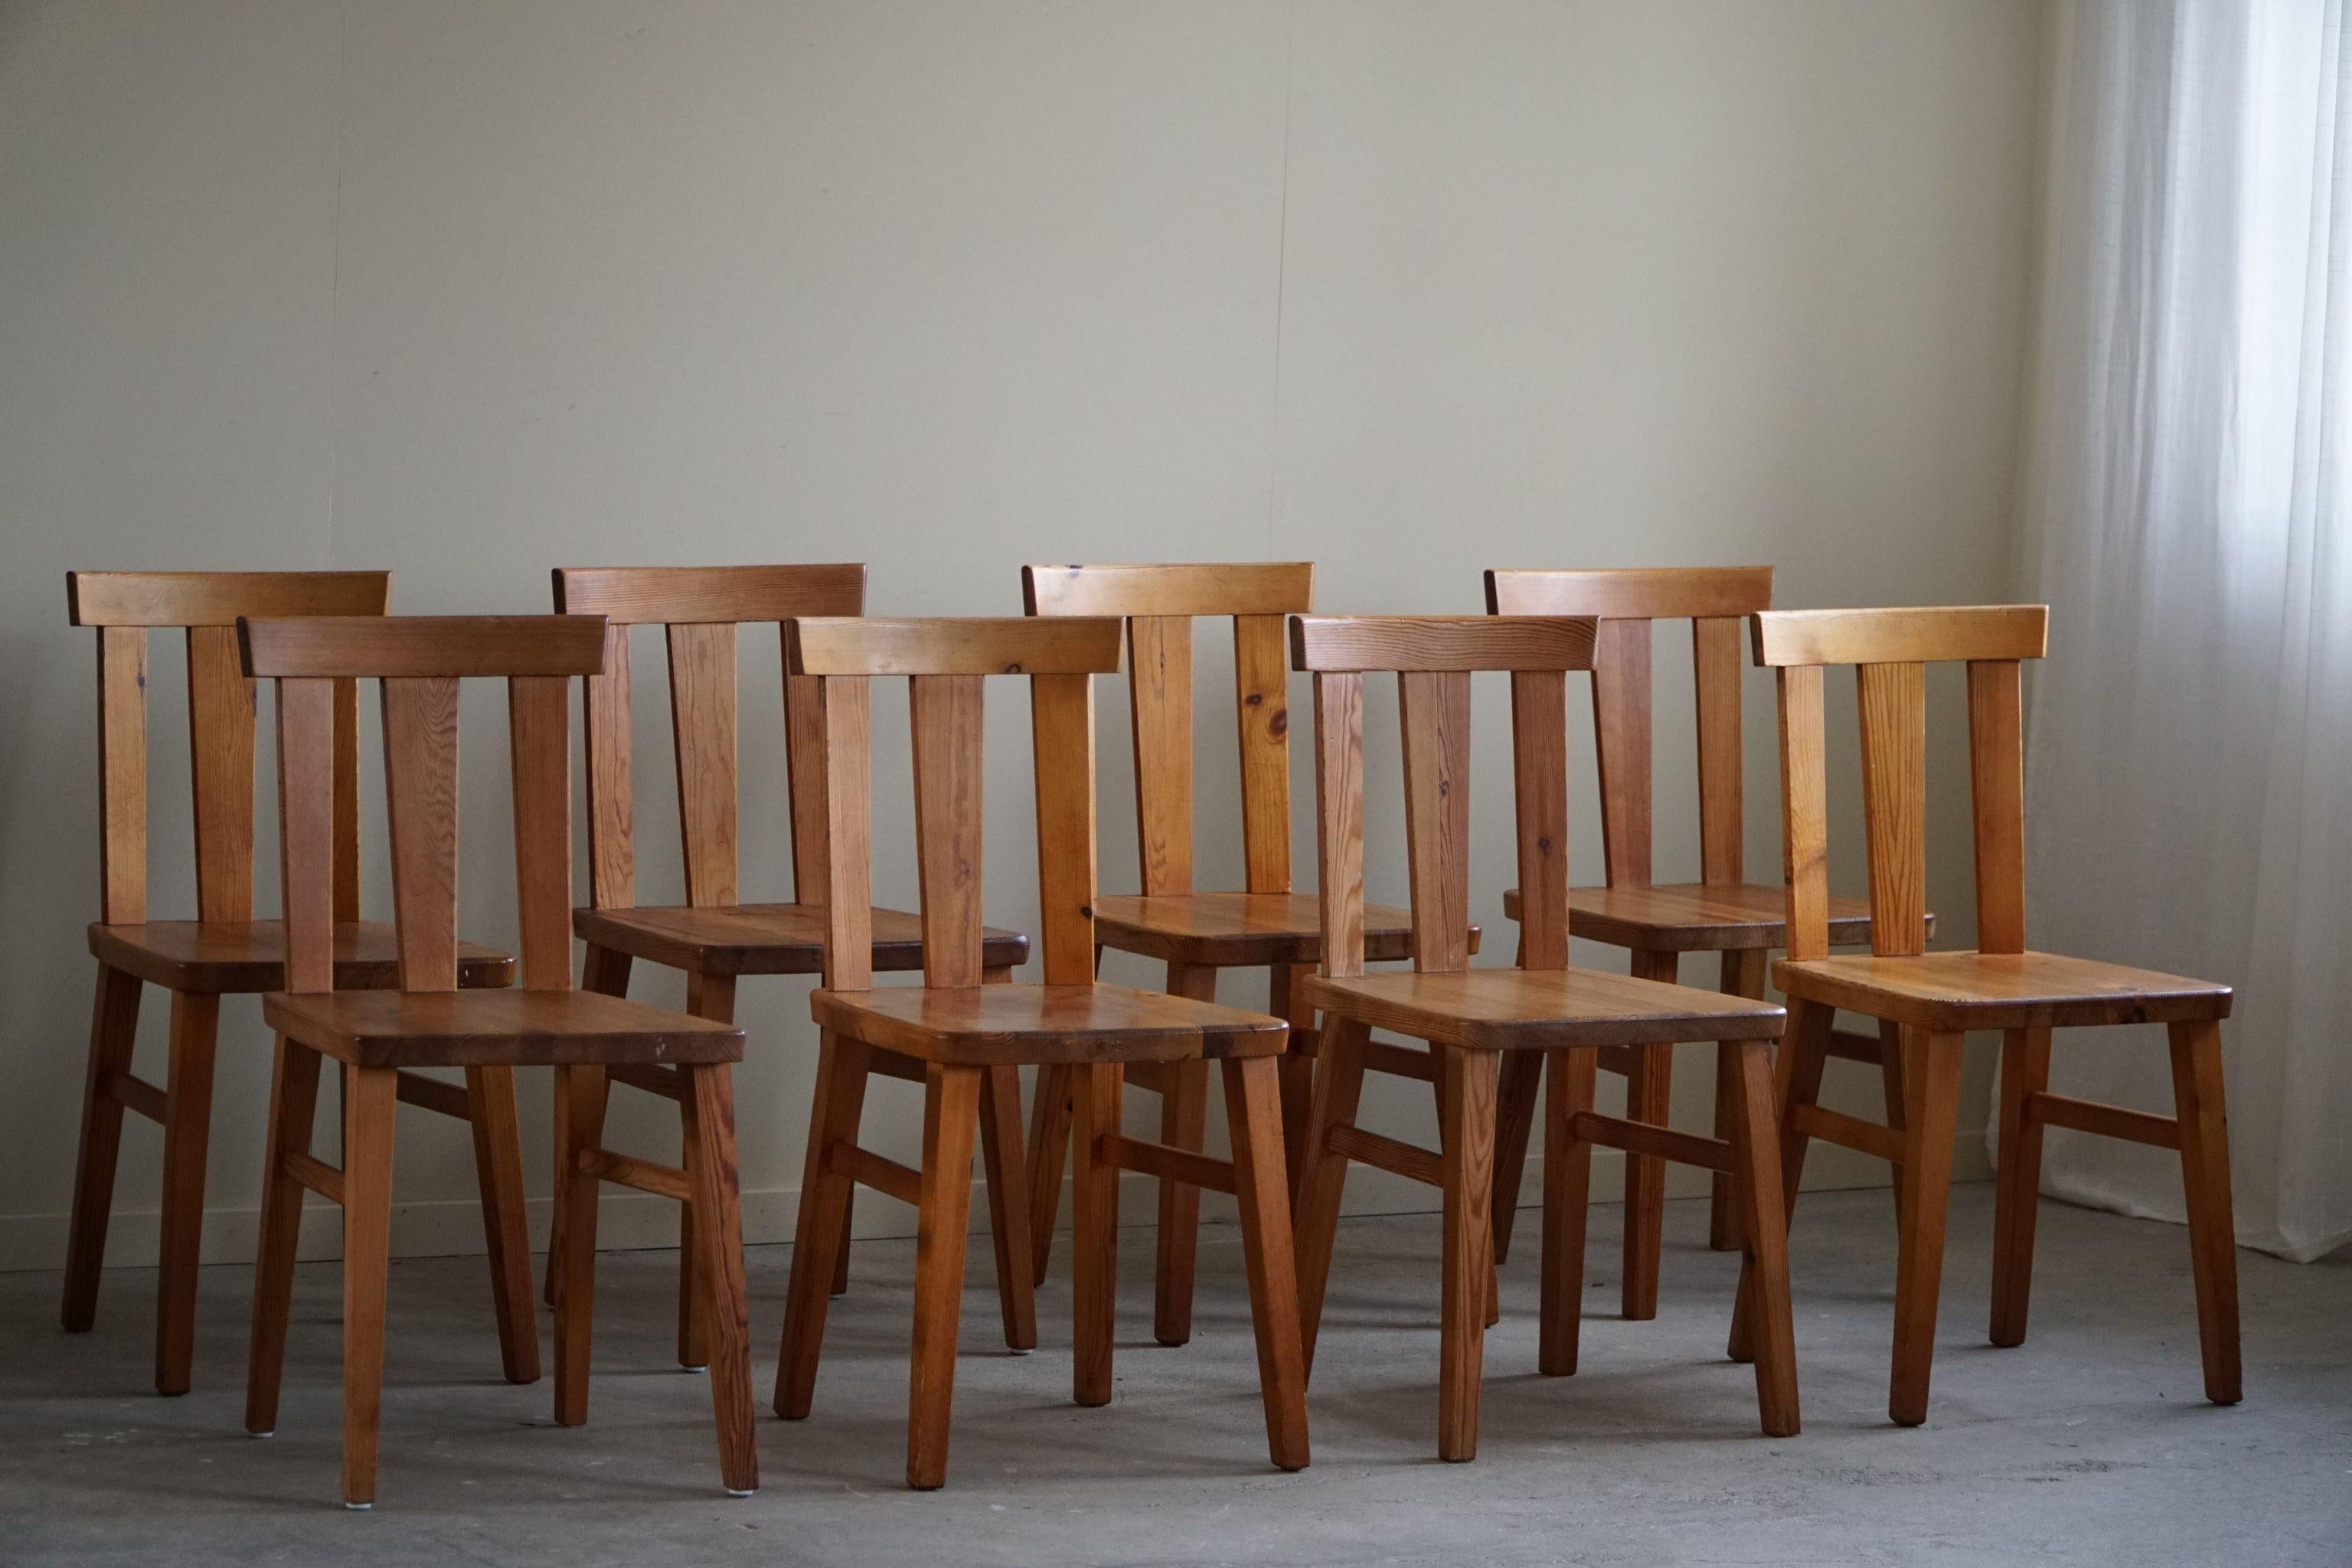 20th Century Swedish Modern, Set of 8 Chairs in Solid Pine, Axel Einar Hjorth Style, 1950s For Sale